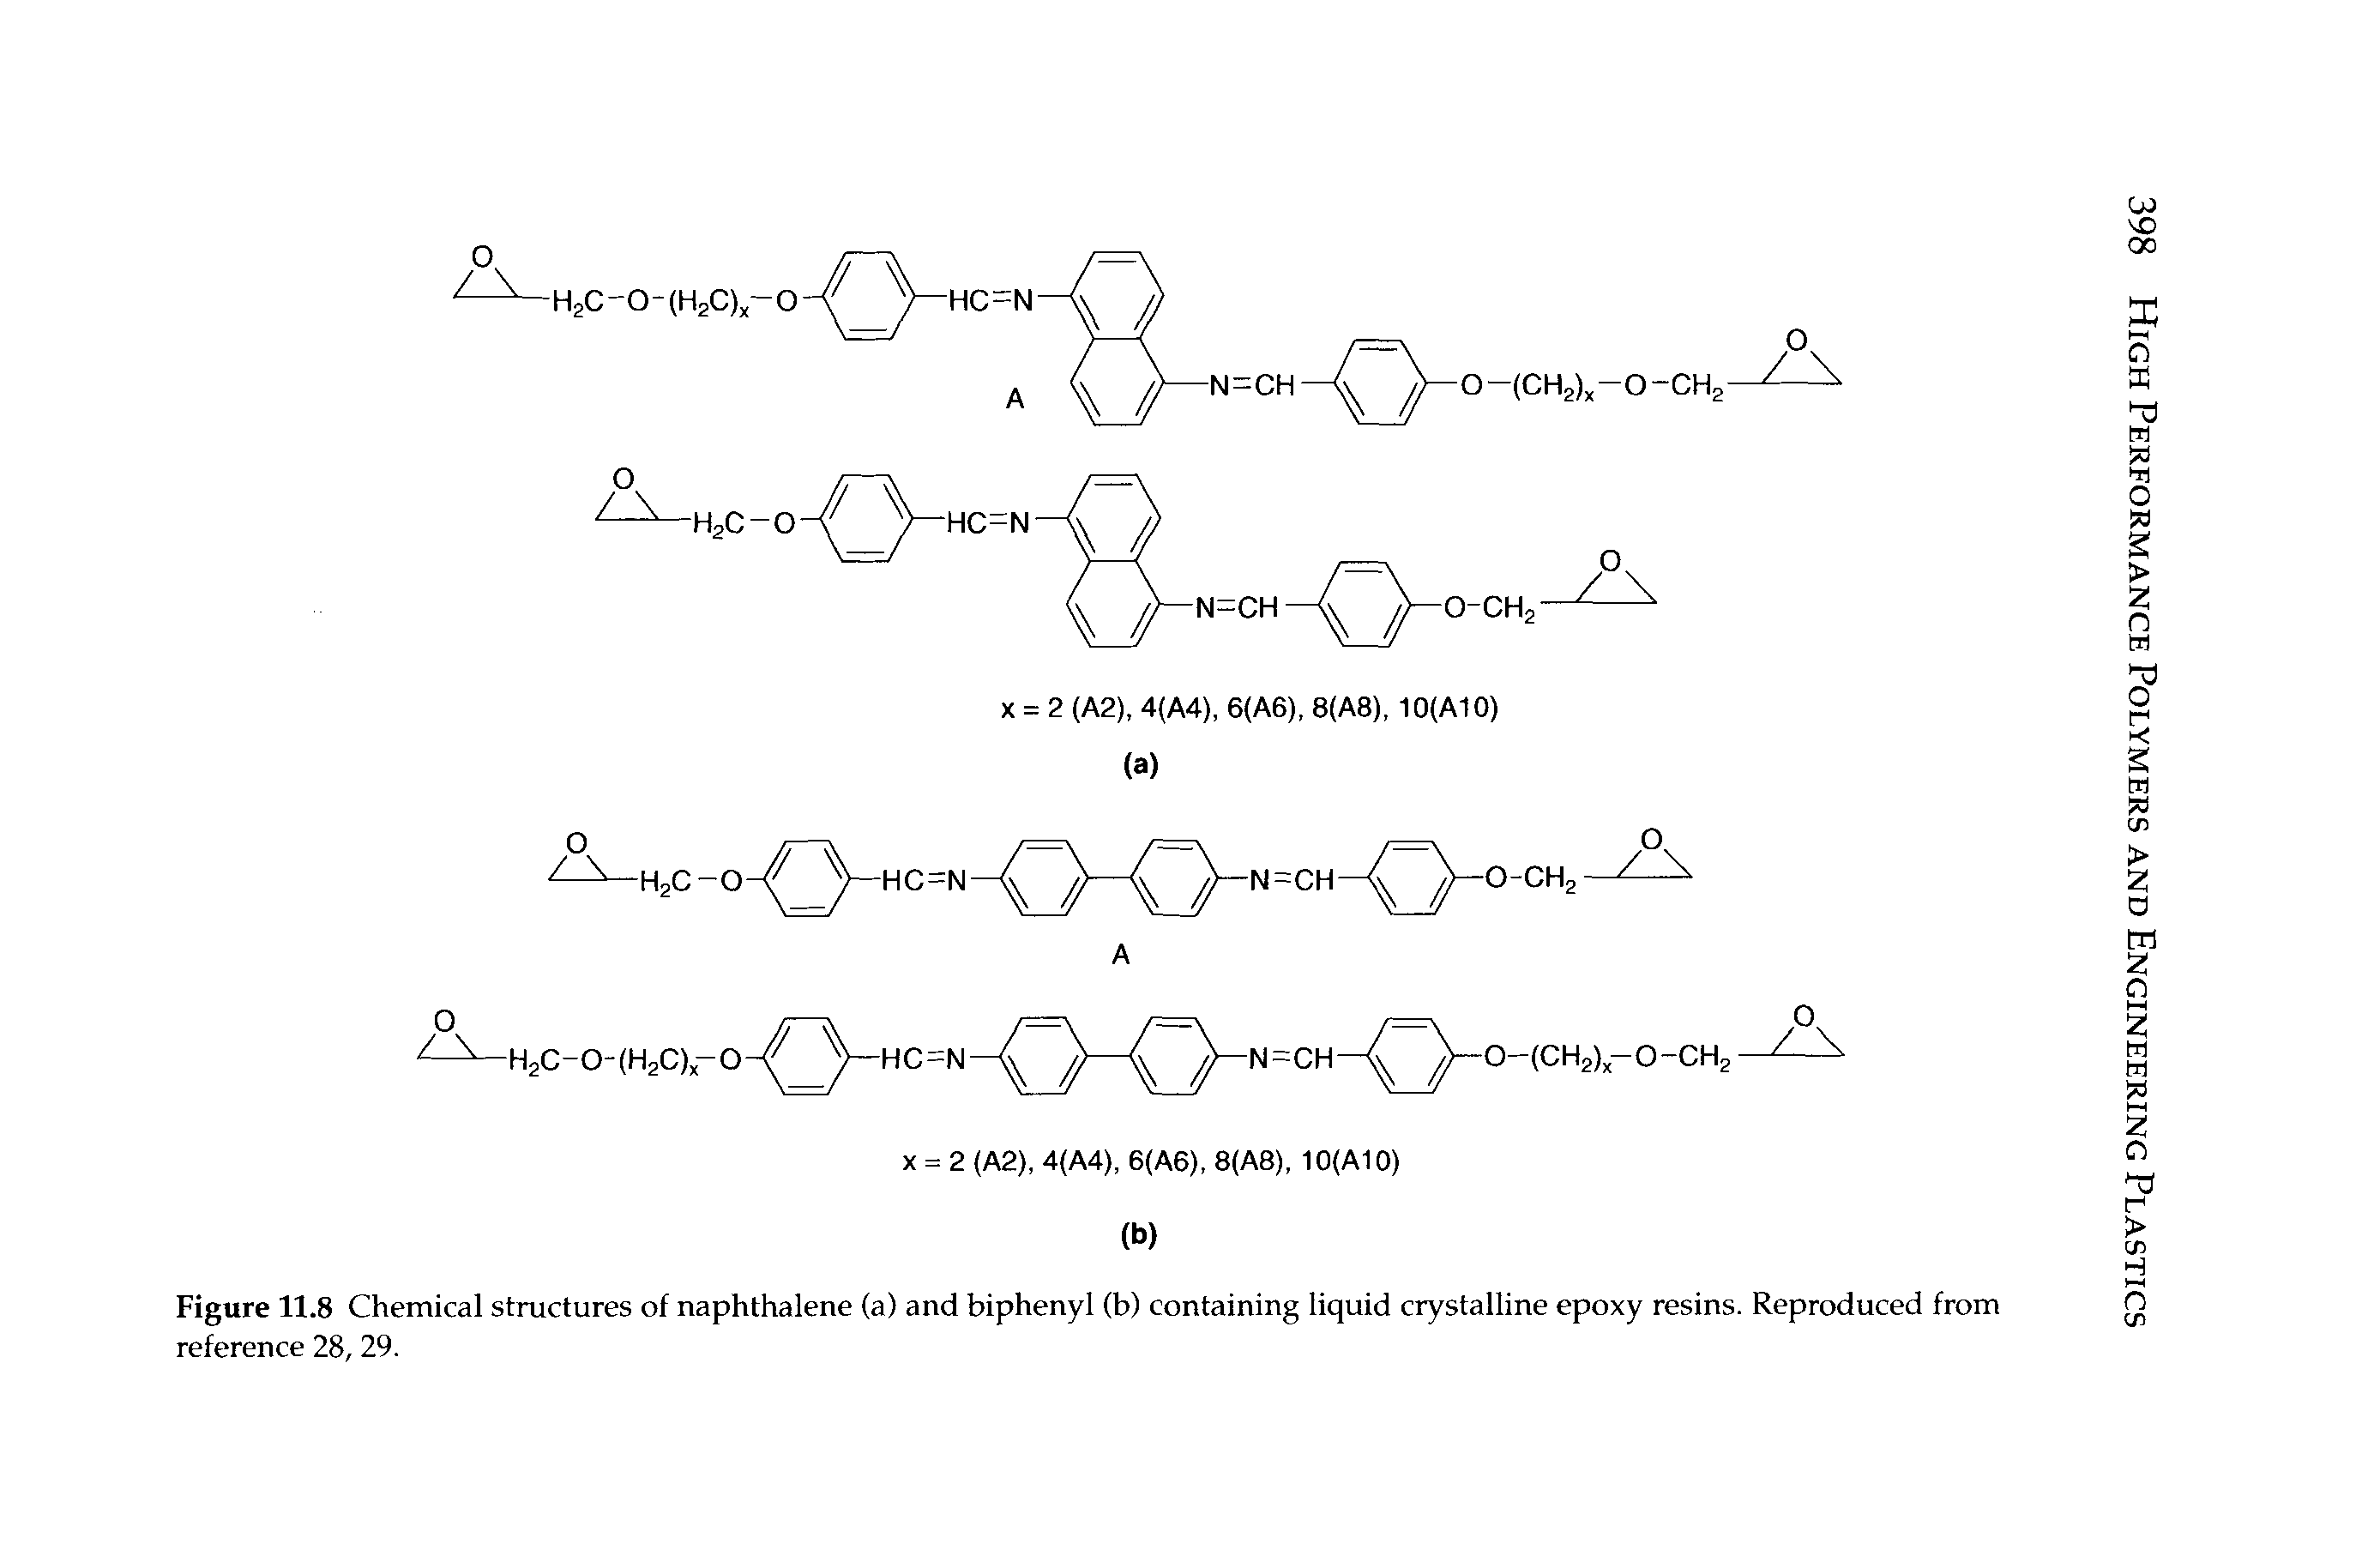 Figure 11.8 Chemical structures of naphthalene (a) and biphenyl (b) containing liquid crystalline epoxy resins. Reproduced from reference 28, 29.